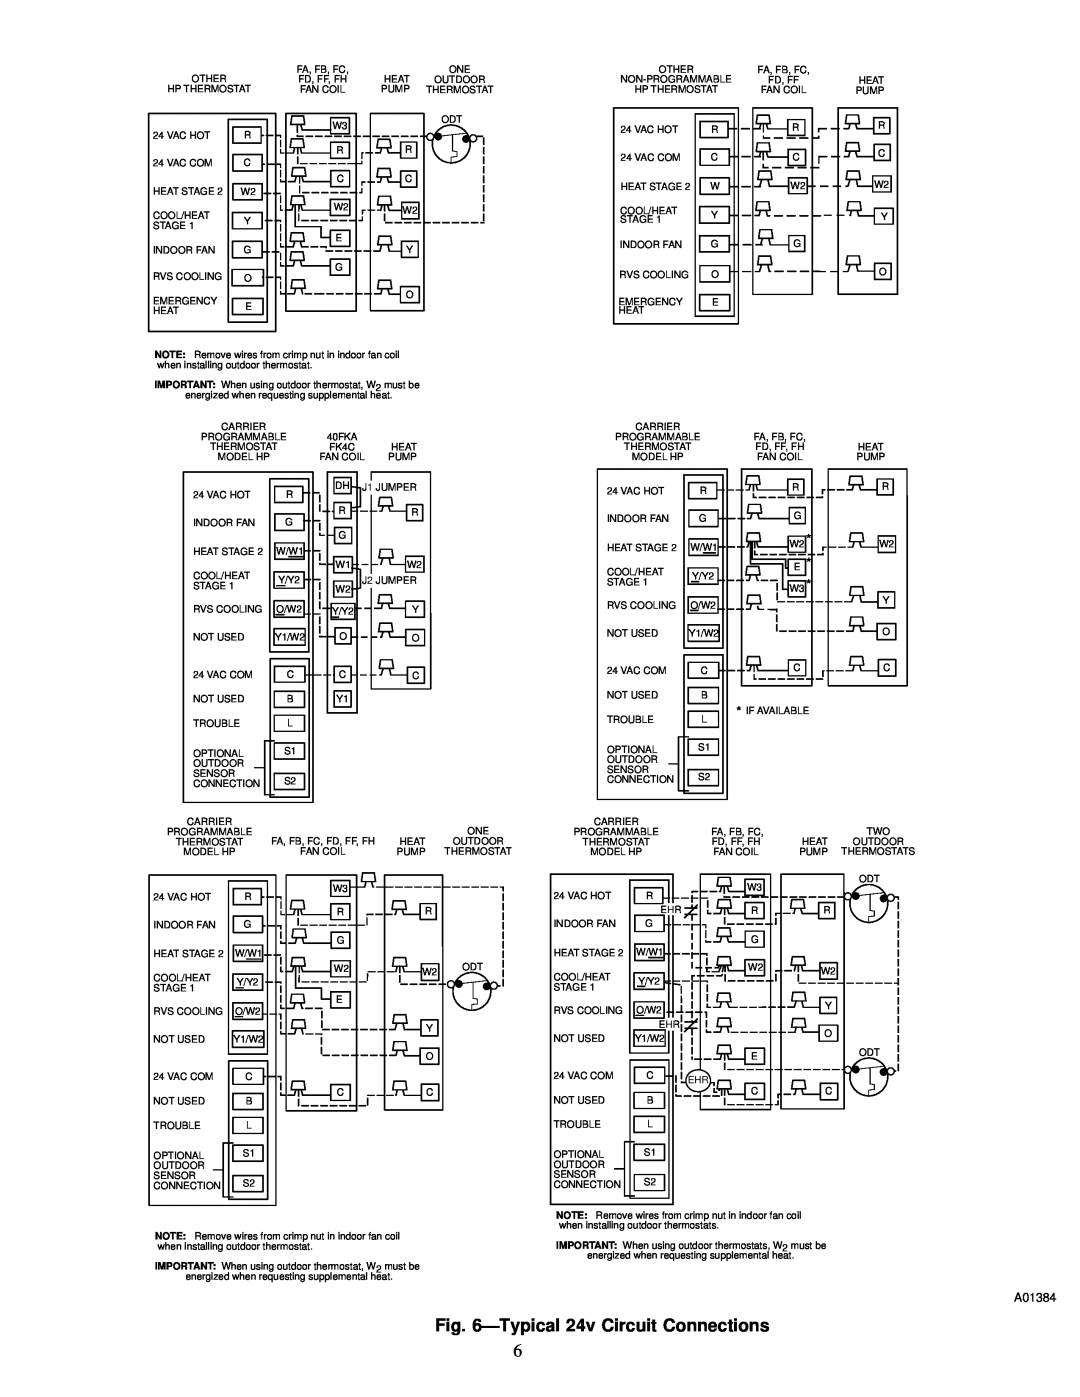 Carrier 38YCW instruction manual Typical24v Circuit Connections, A01384 